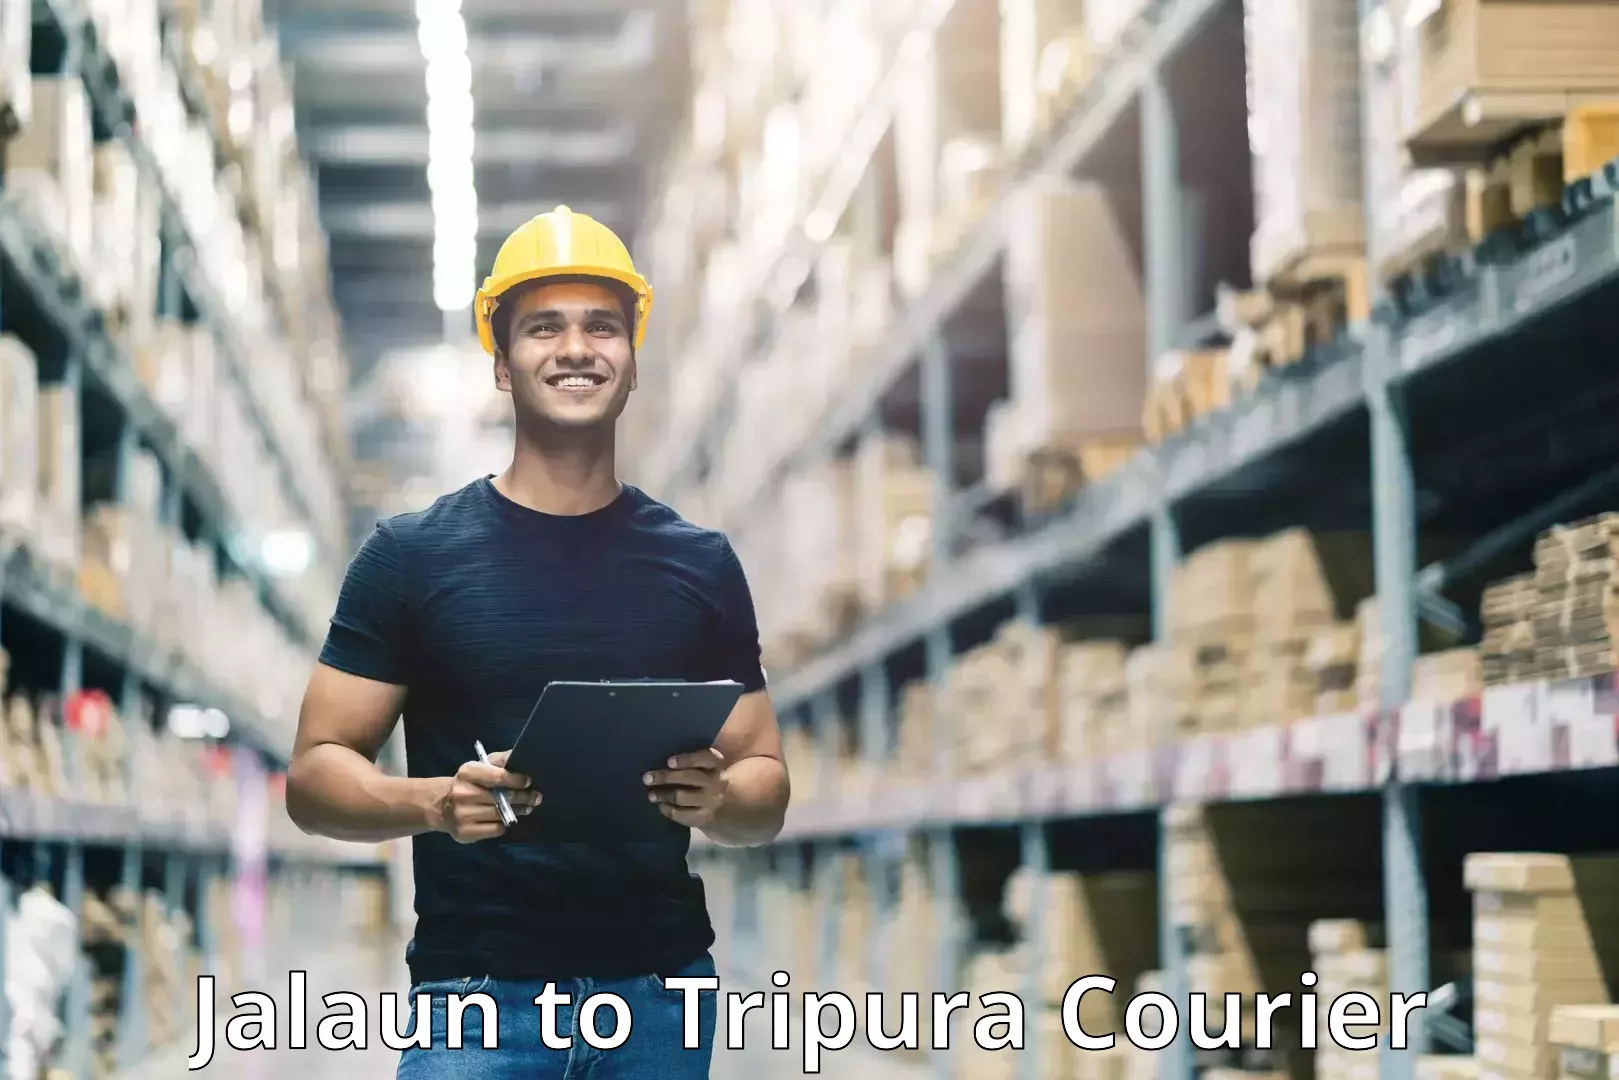 Easy access courier services Jalaun to Udaipur Tripura